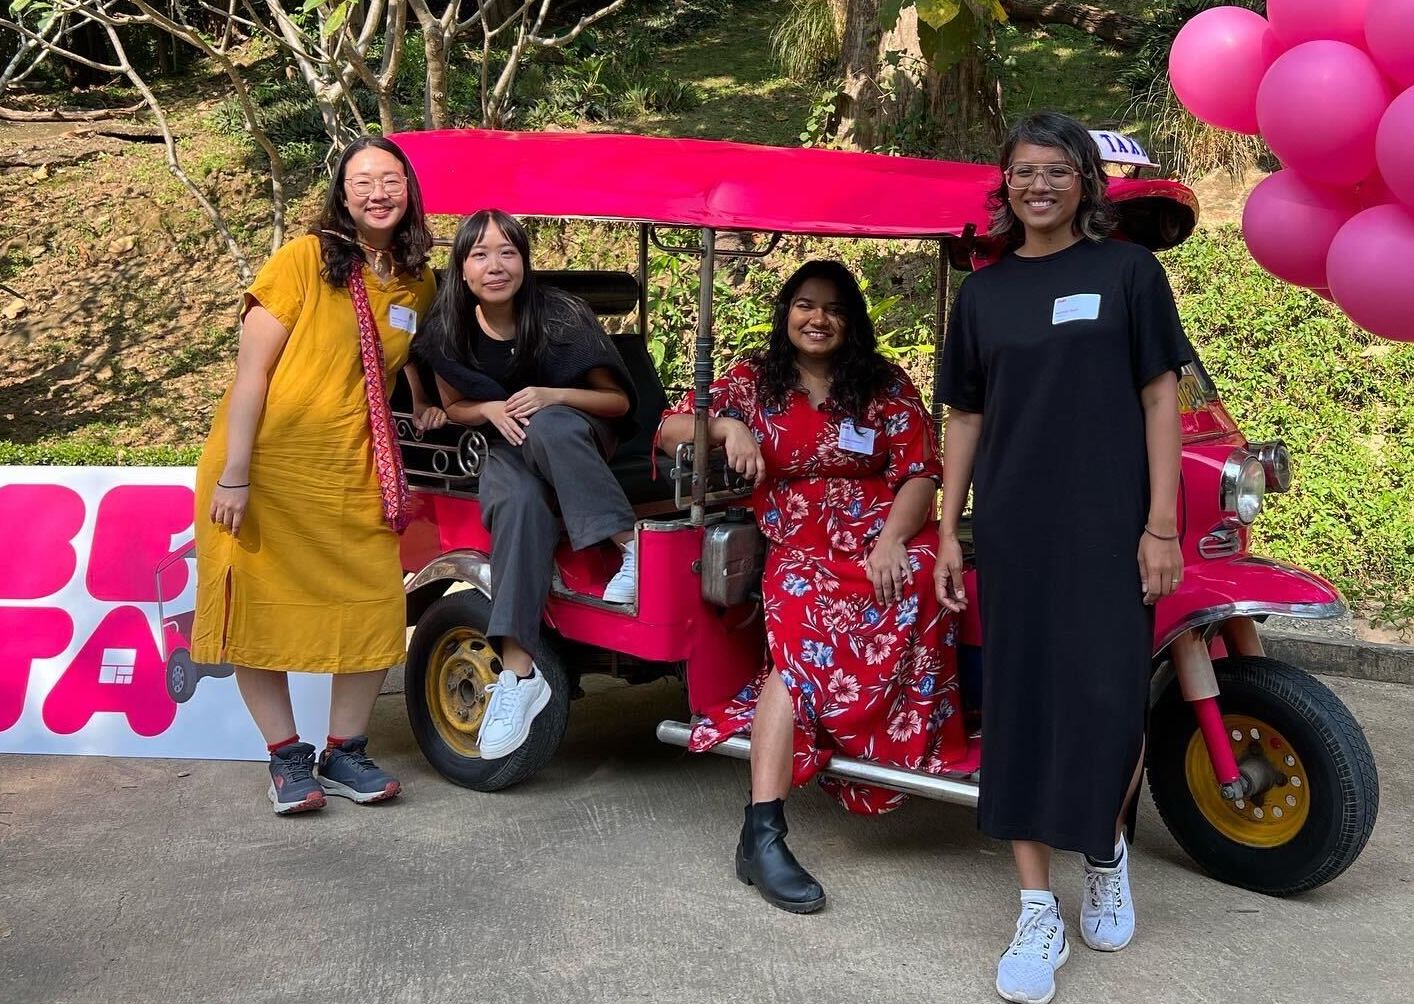 Colleagues from the Kontinentalist news site, based in Singapore, pose on a tuktuk. Co-founder Pei Ying Loh is on far left; Editorial lead Nabilah Said is on the far right.